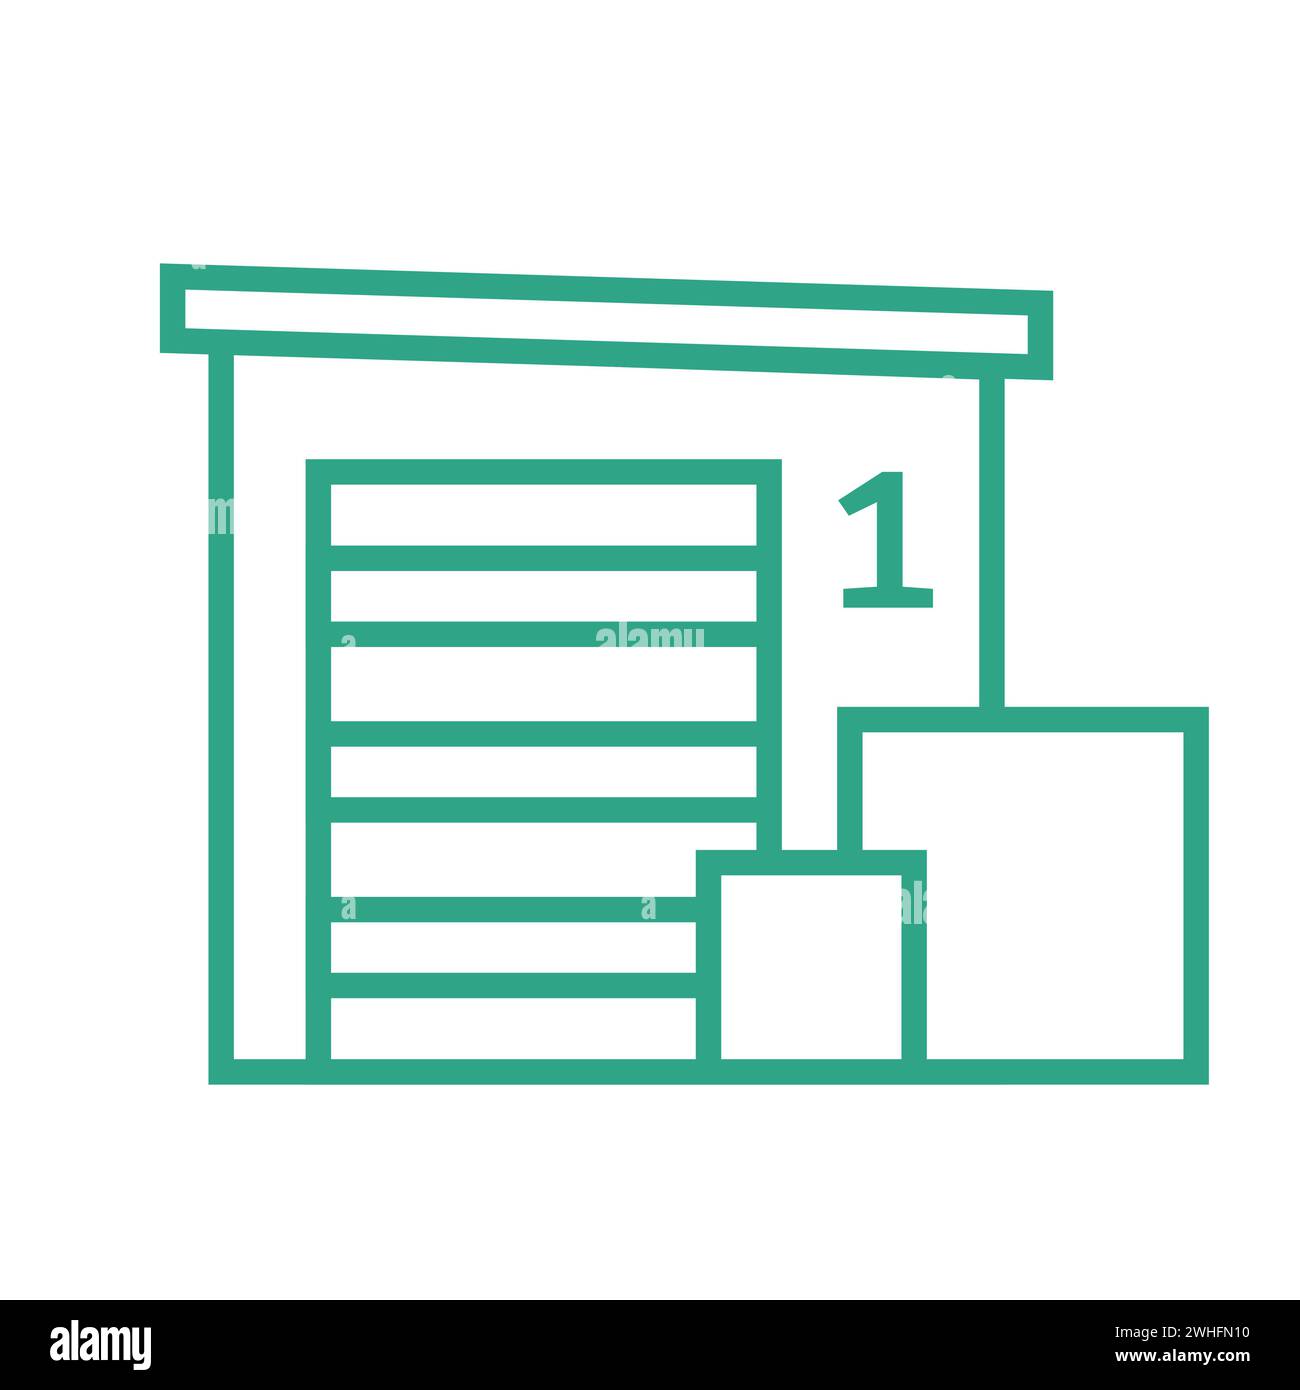 Outline small warehouse icon isolated on white background. Part of supply chain. Vector illustration. Door of loading discharging terminal. Boxes. Stock Vector